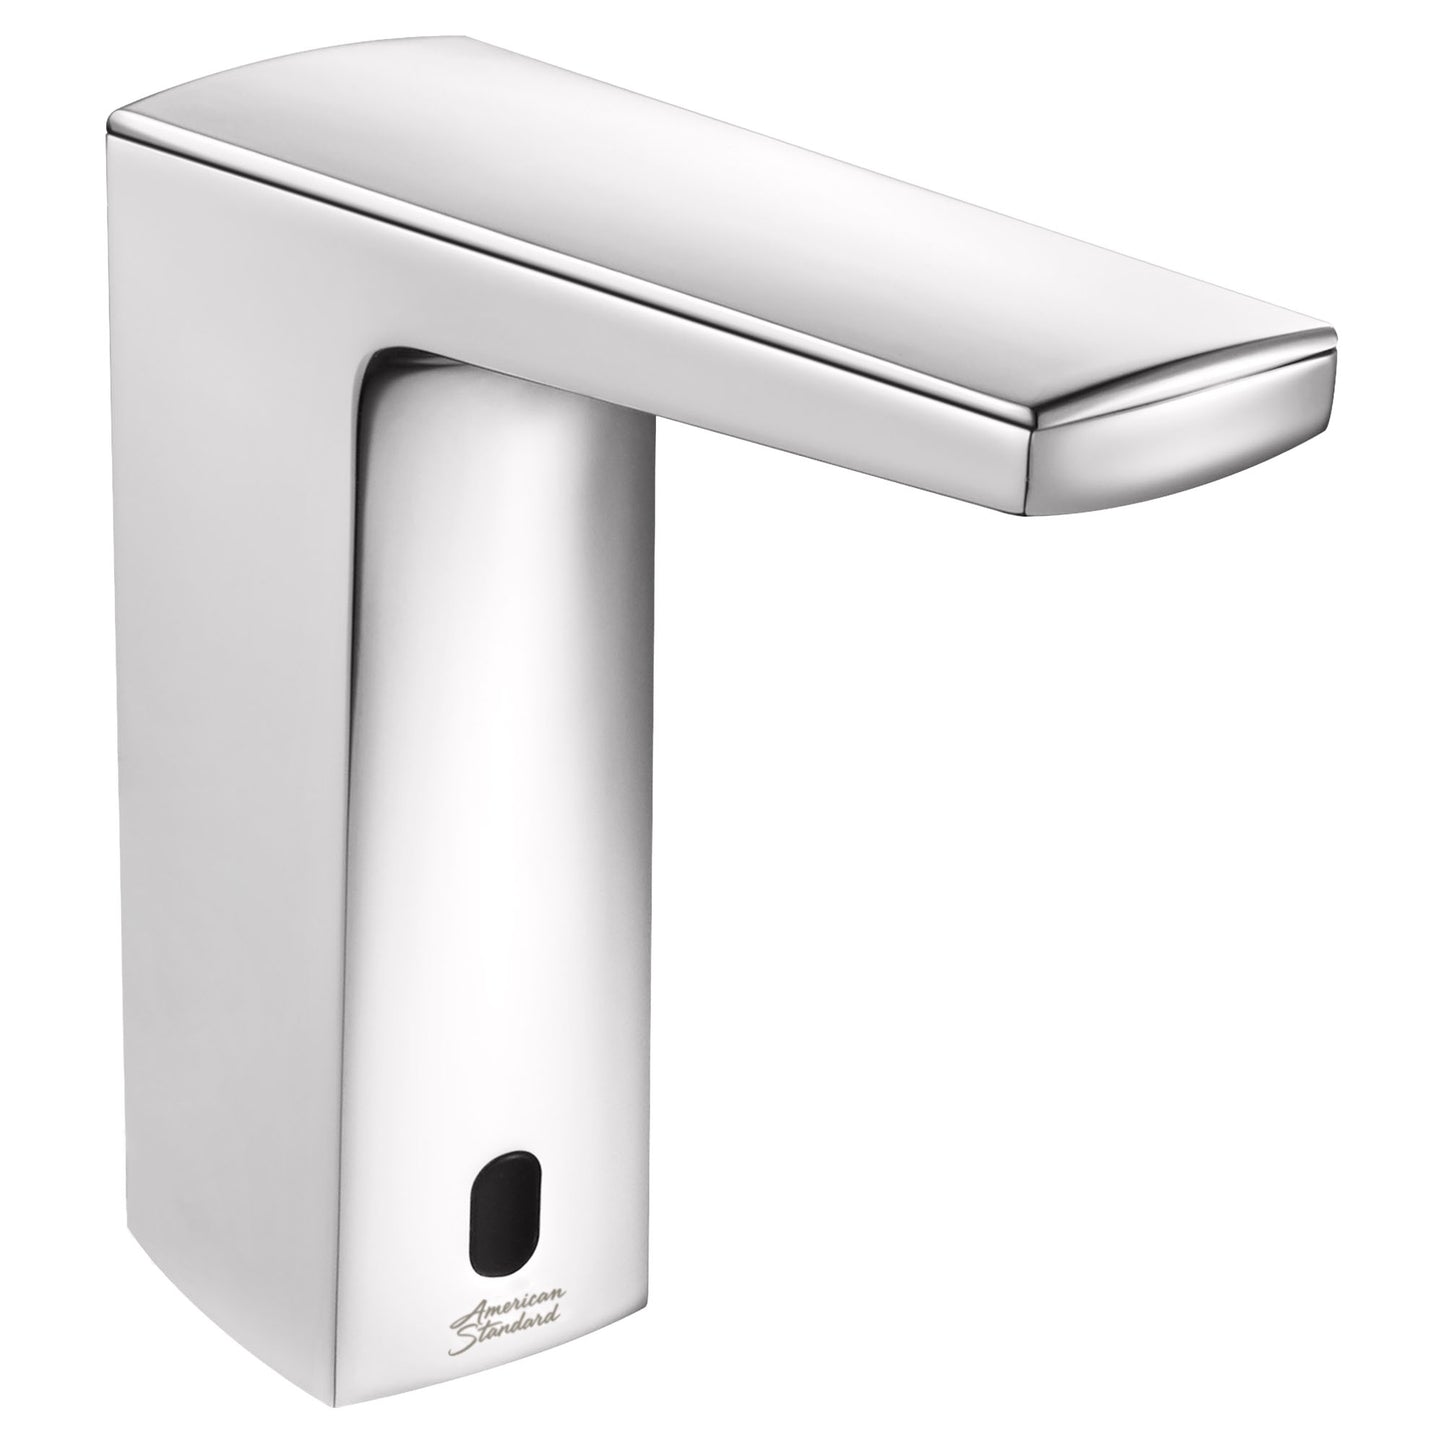 AMERICAN-STANDARD 702B103.002, Paradigm Selectronic Touchless Faucet, Base Model, 0.35 gpm/1.3 Lpm in Chrome